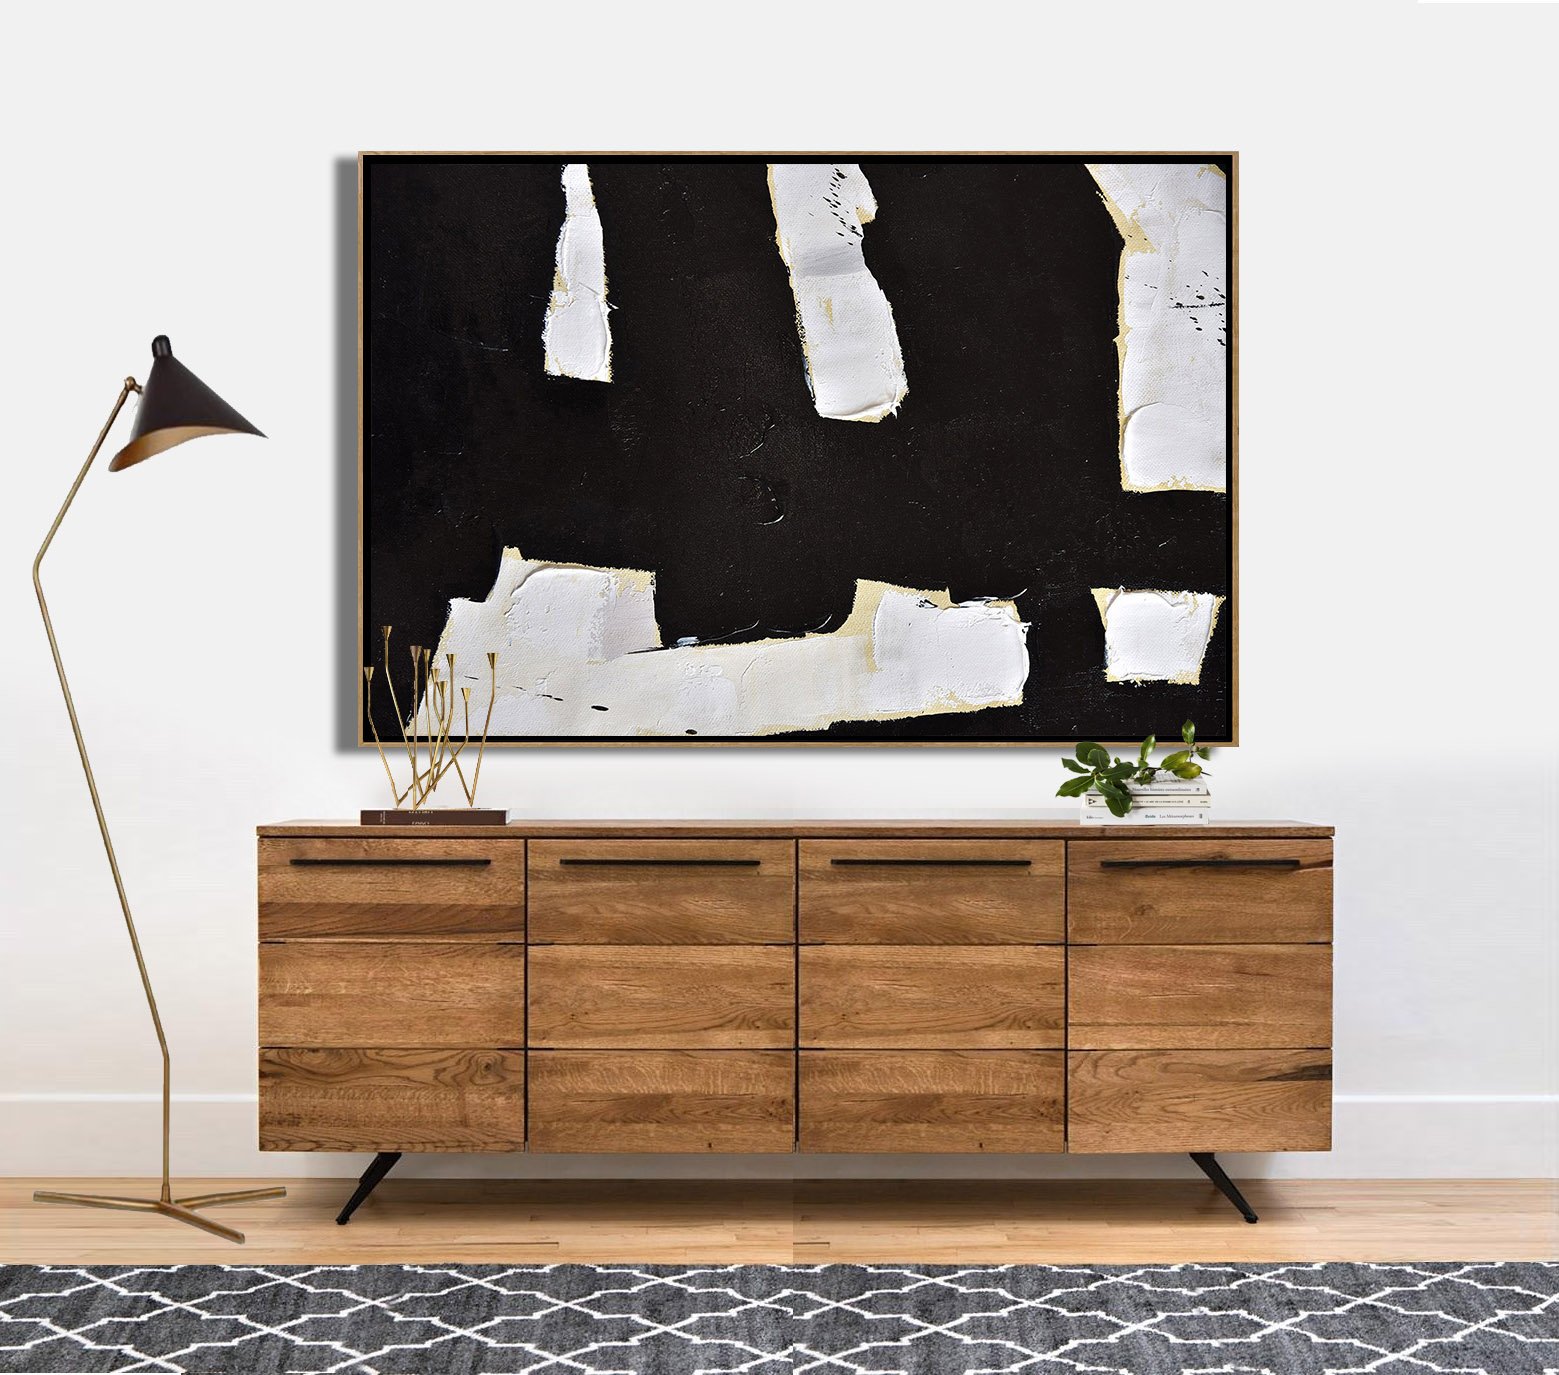 Large Canvas Wall Art For Sale,Horizontal Palette Knife Minimal Canvas Art Painting Black White Beige - Hand-Painted Contemporary Art